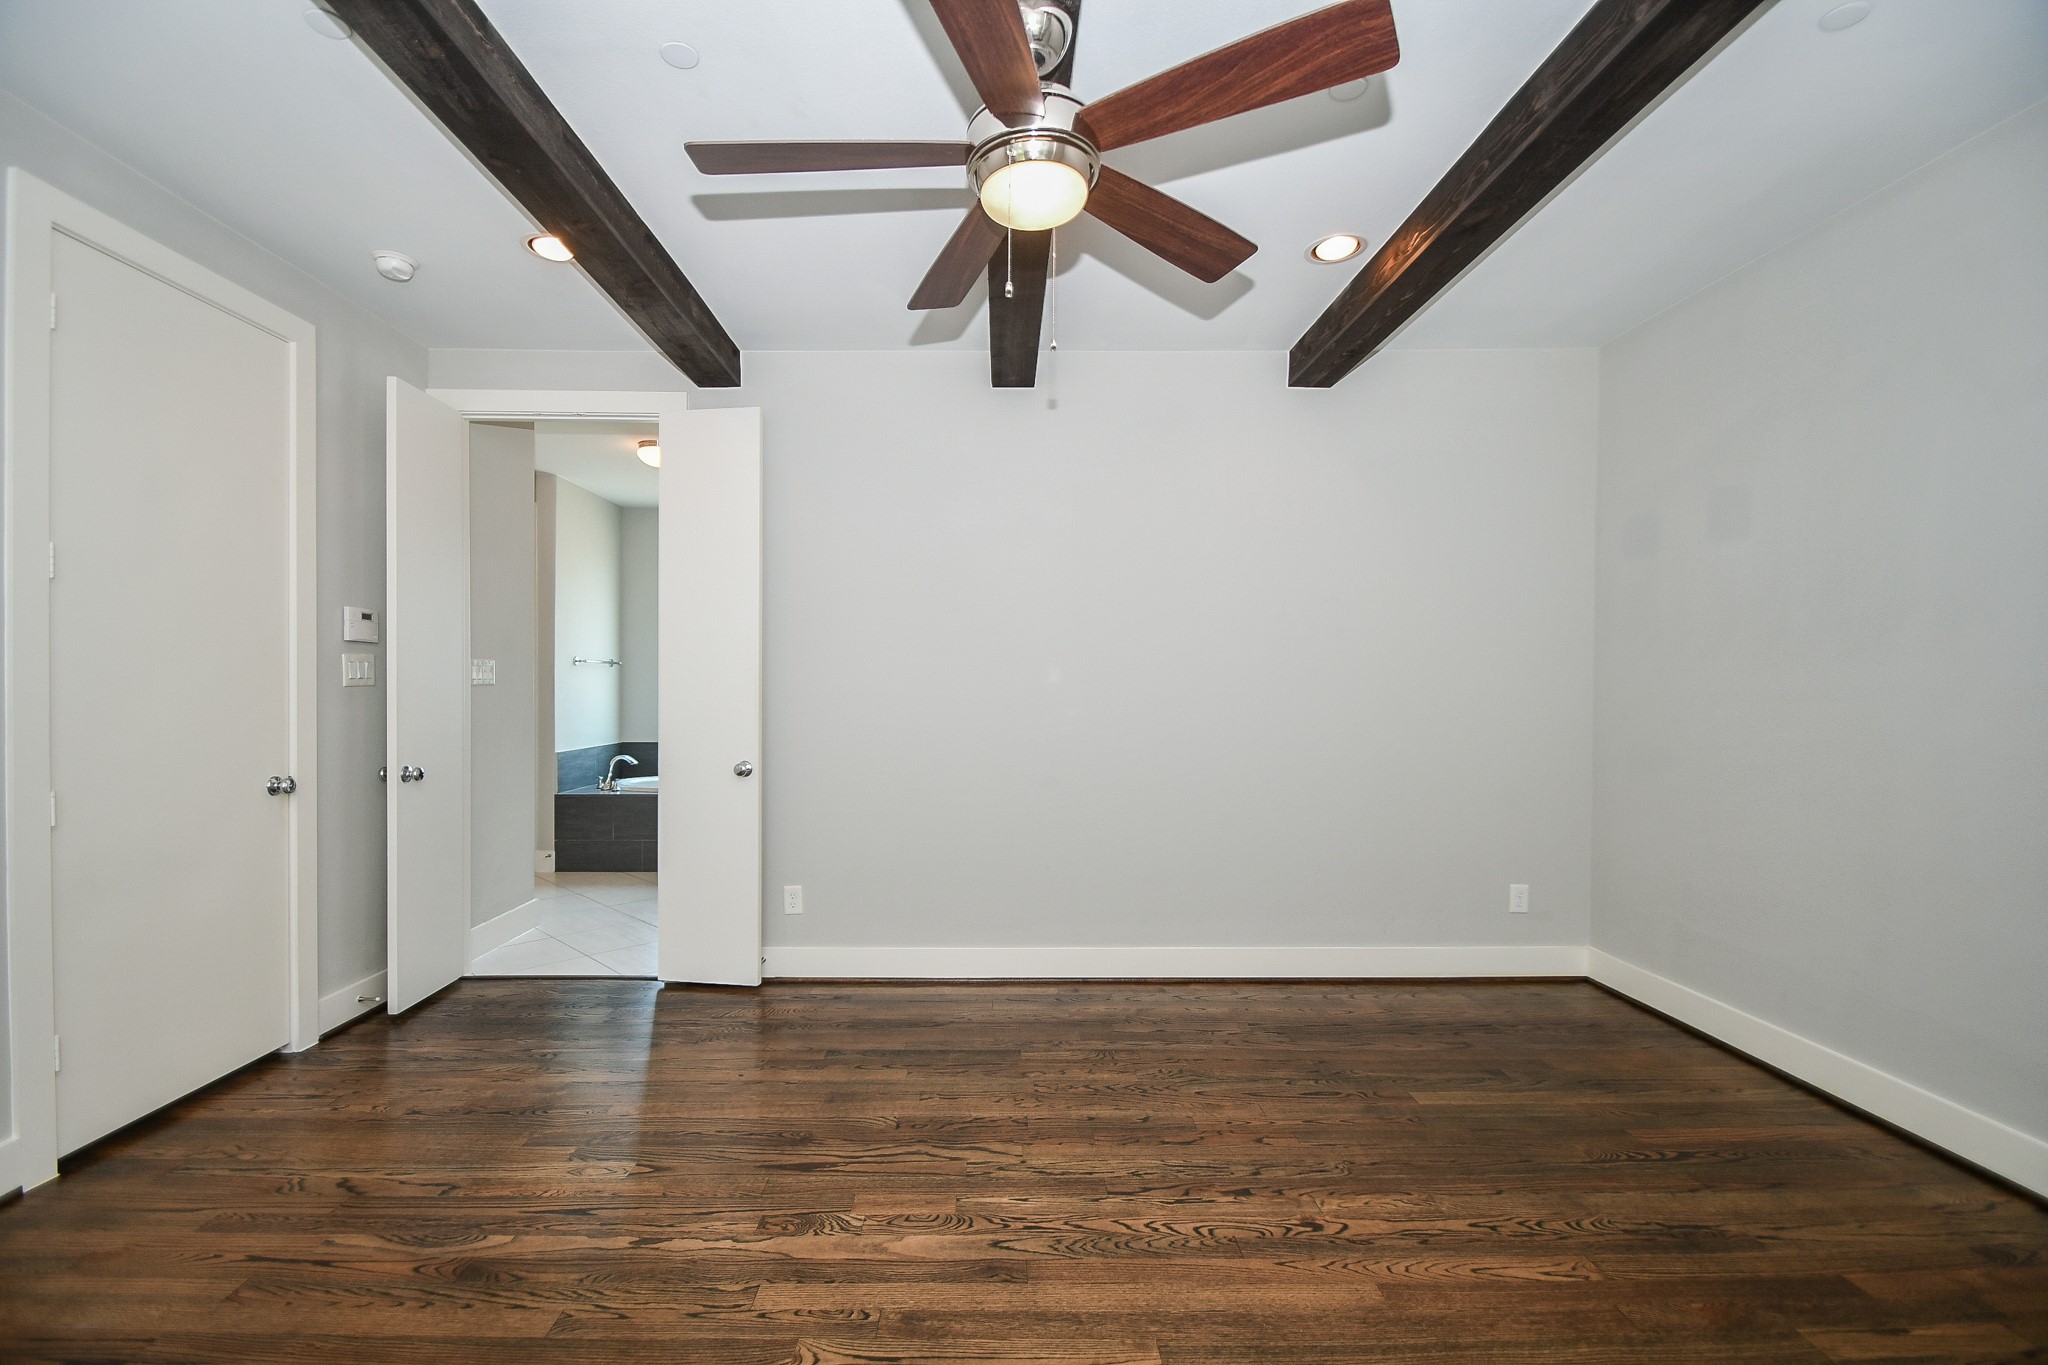 Bright and Open living room attention to detail with the crown molding and beautiful hardwood floors.